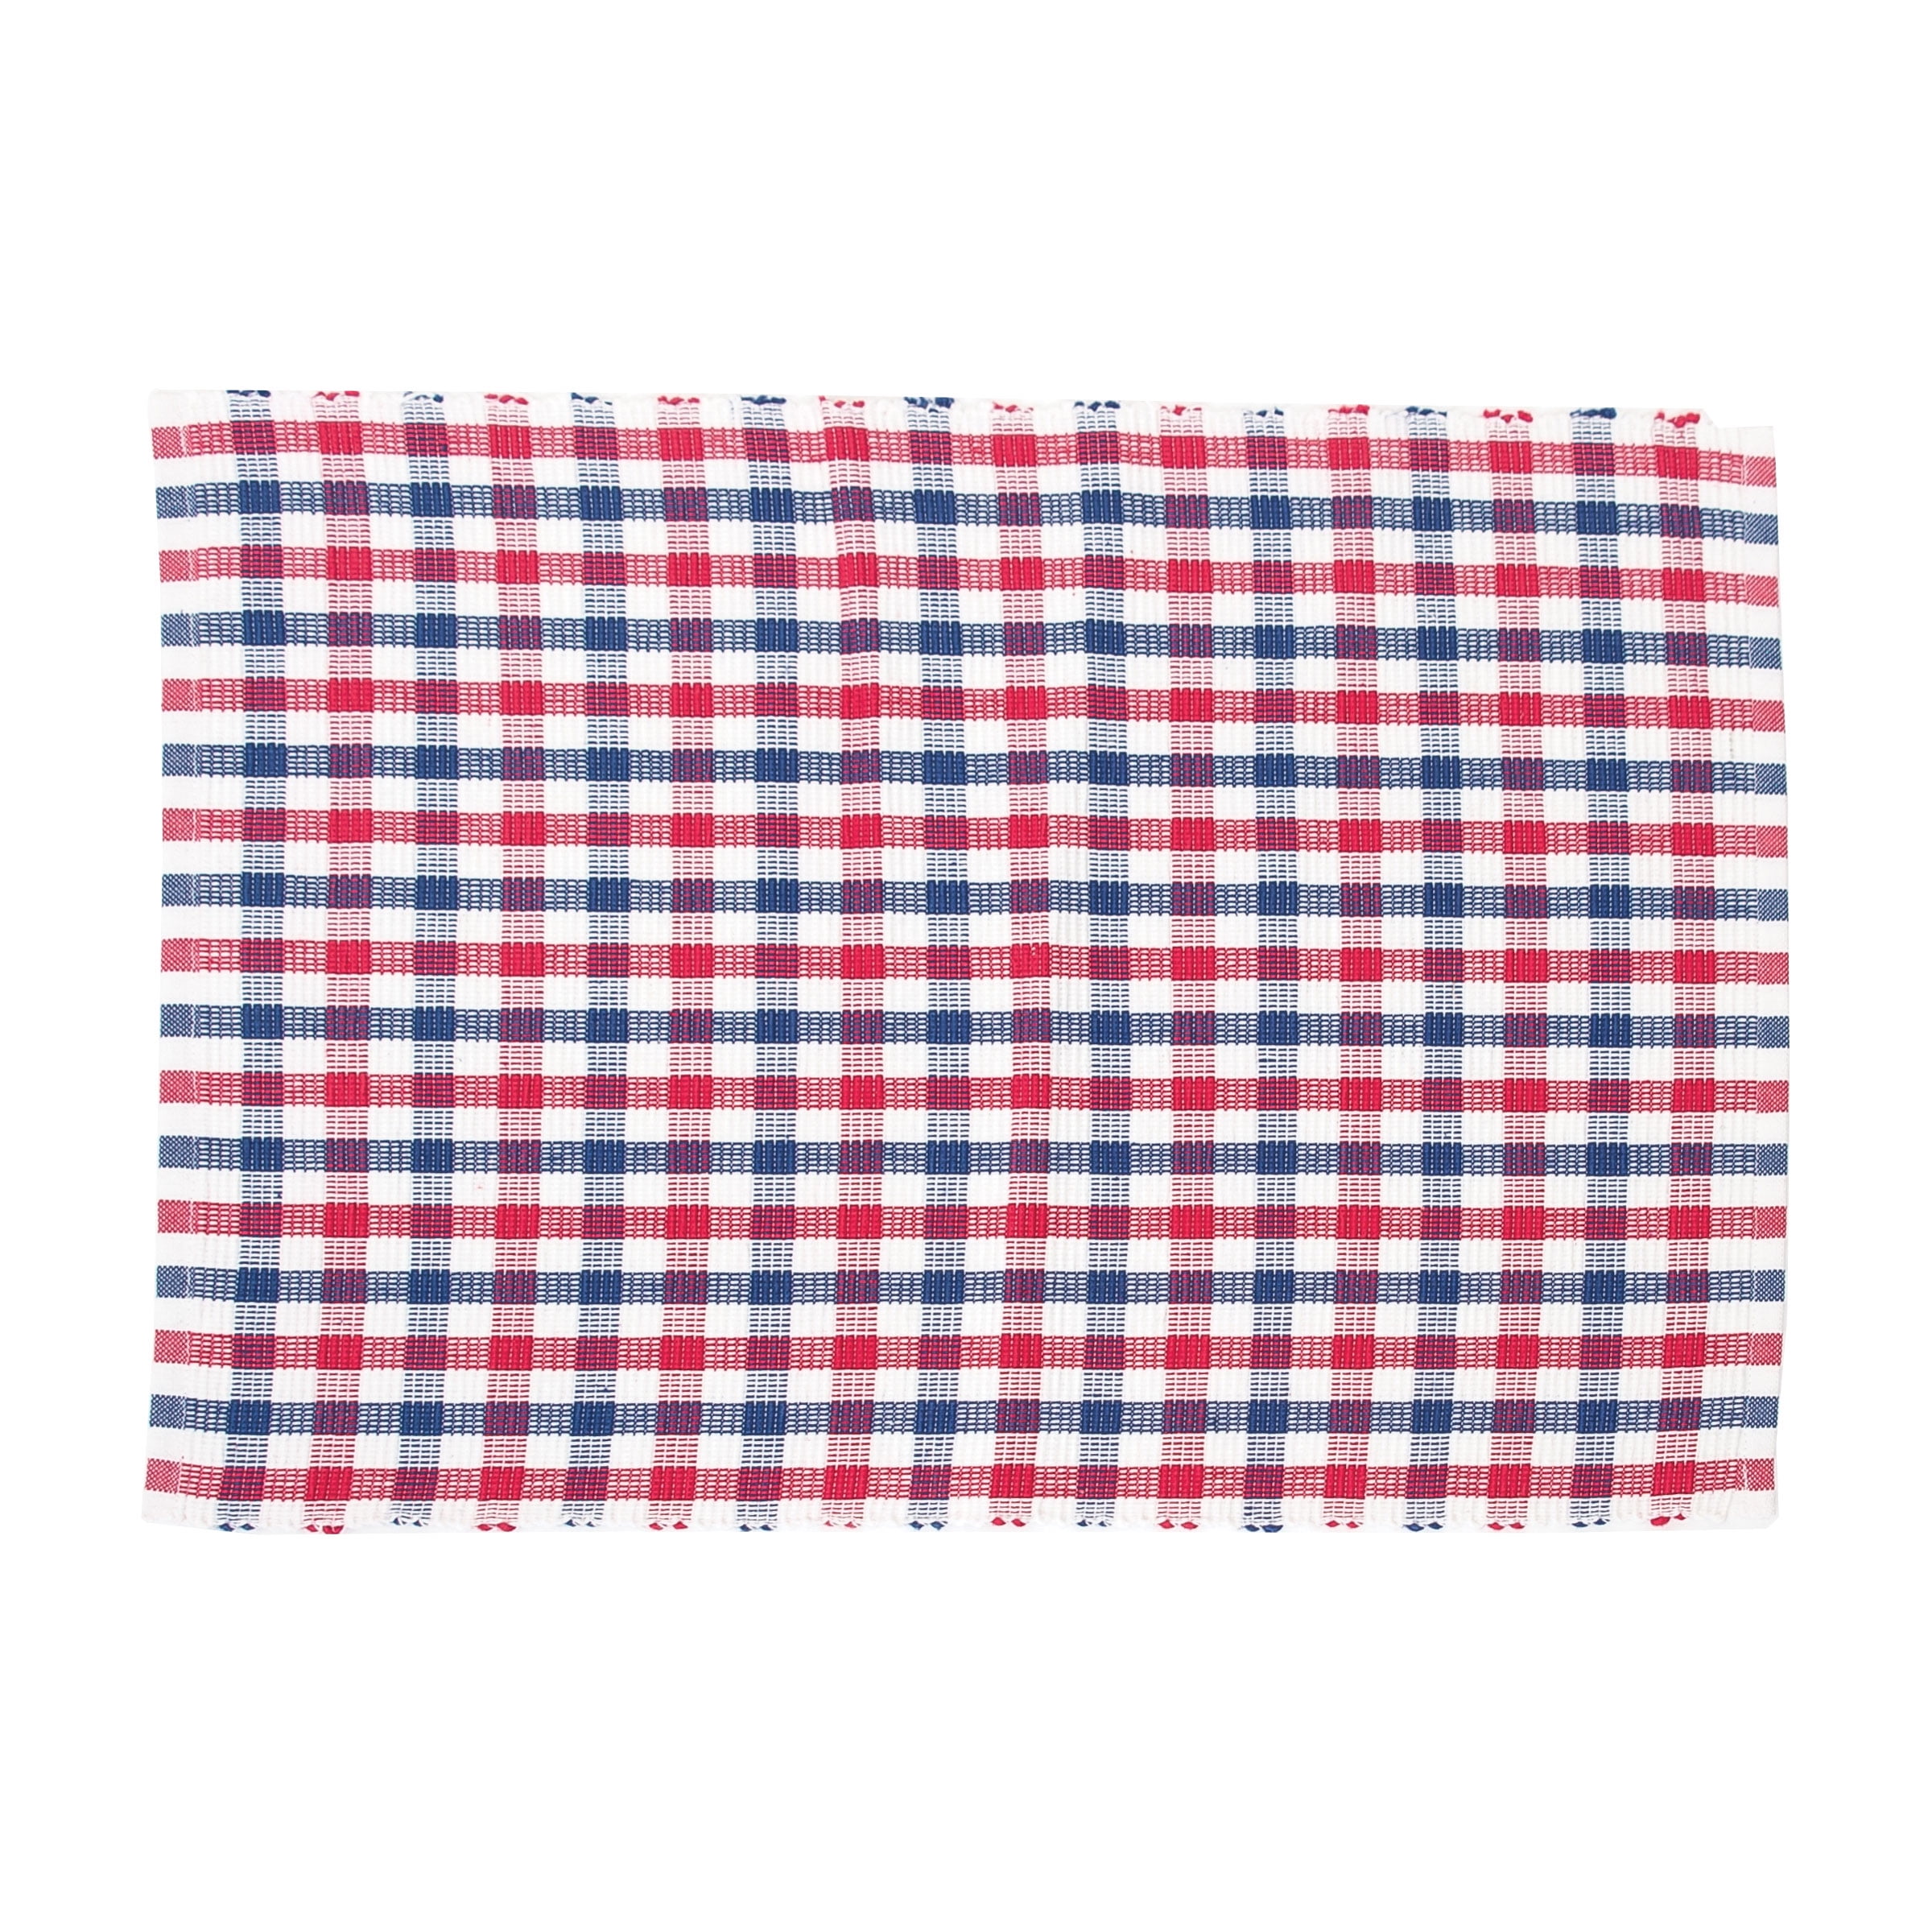 C&F Home Picnic Plaid Woven Kitchen Patriotic Red White Blue American 4th of July Memorial Labor Day Towel Kitchen Towel Picnic Red Plaid C&F Enterprises 